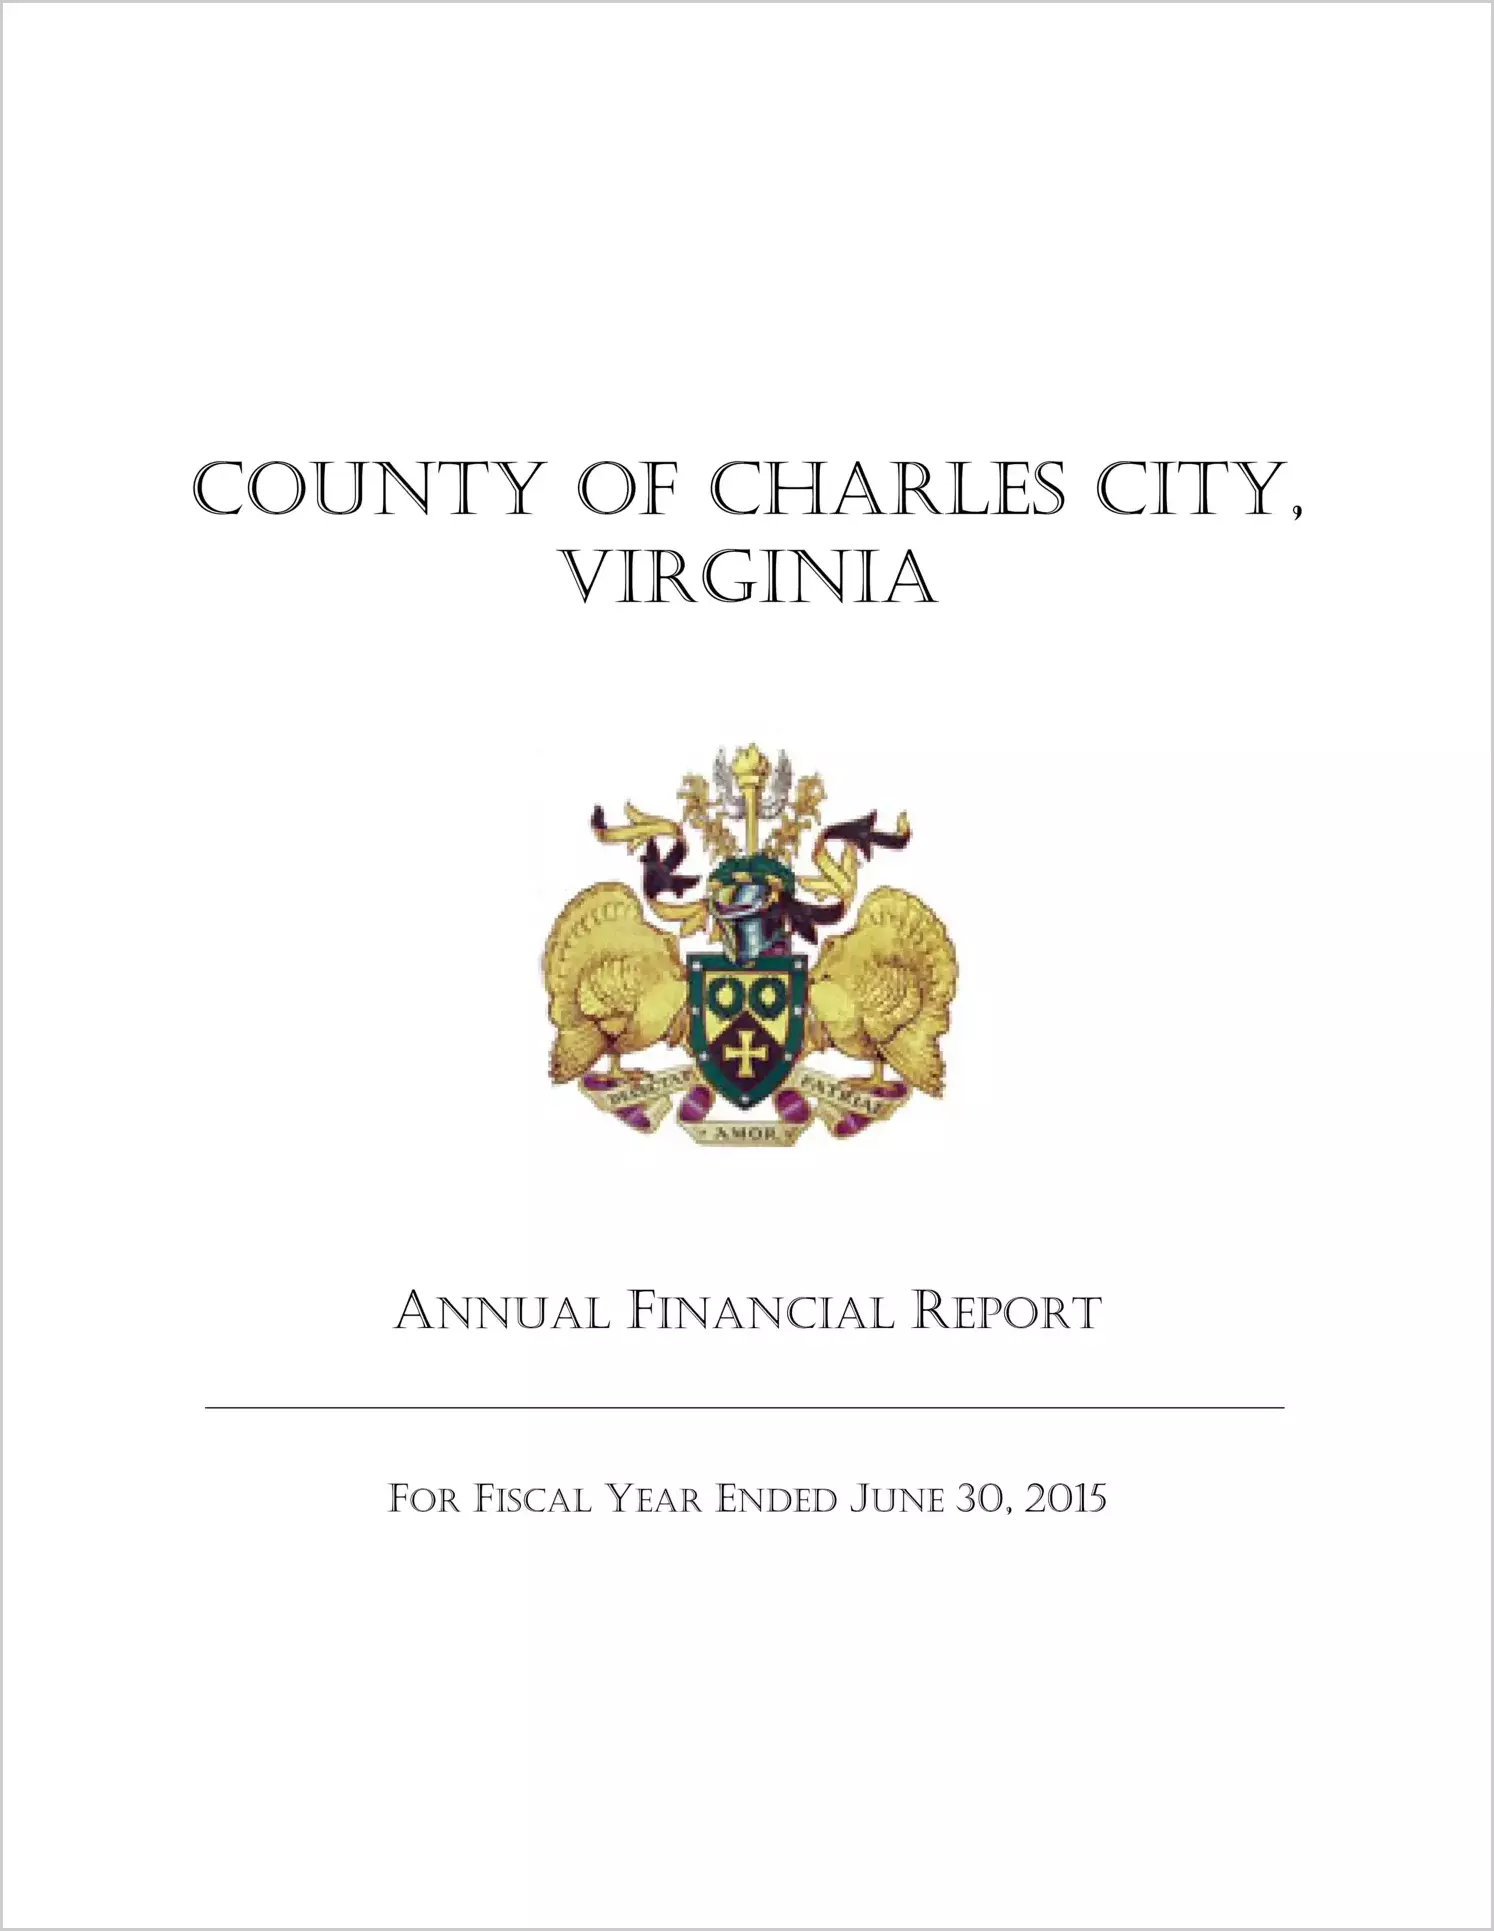 2015 Annual Financial Report for County of Charles City